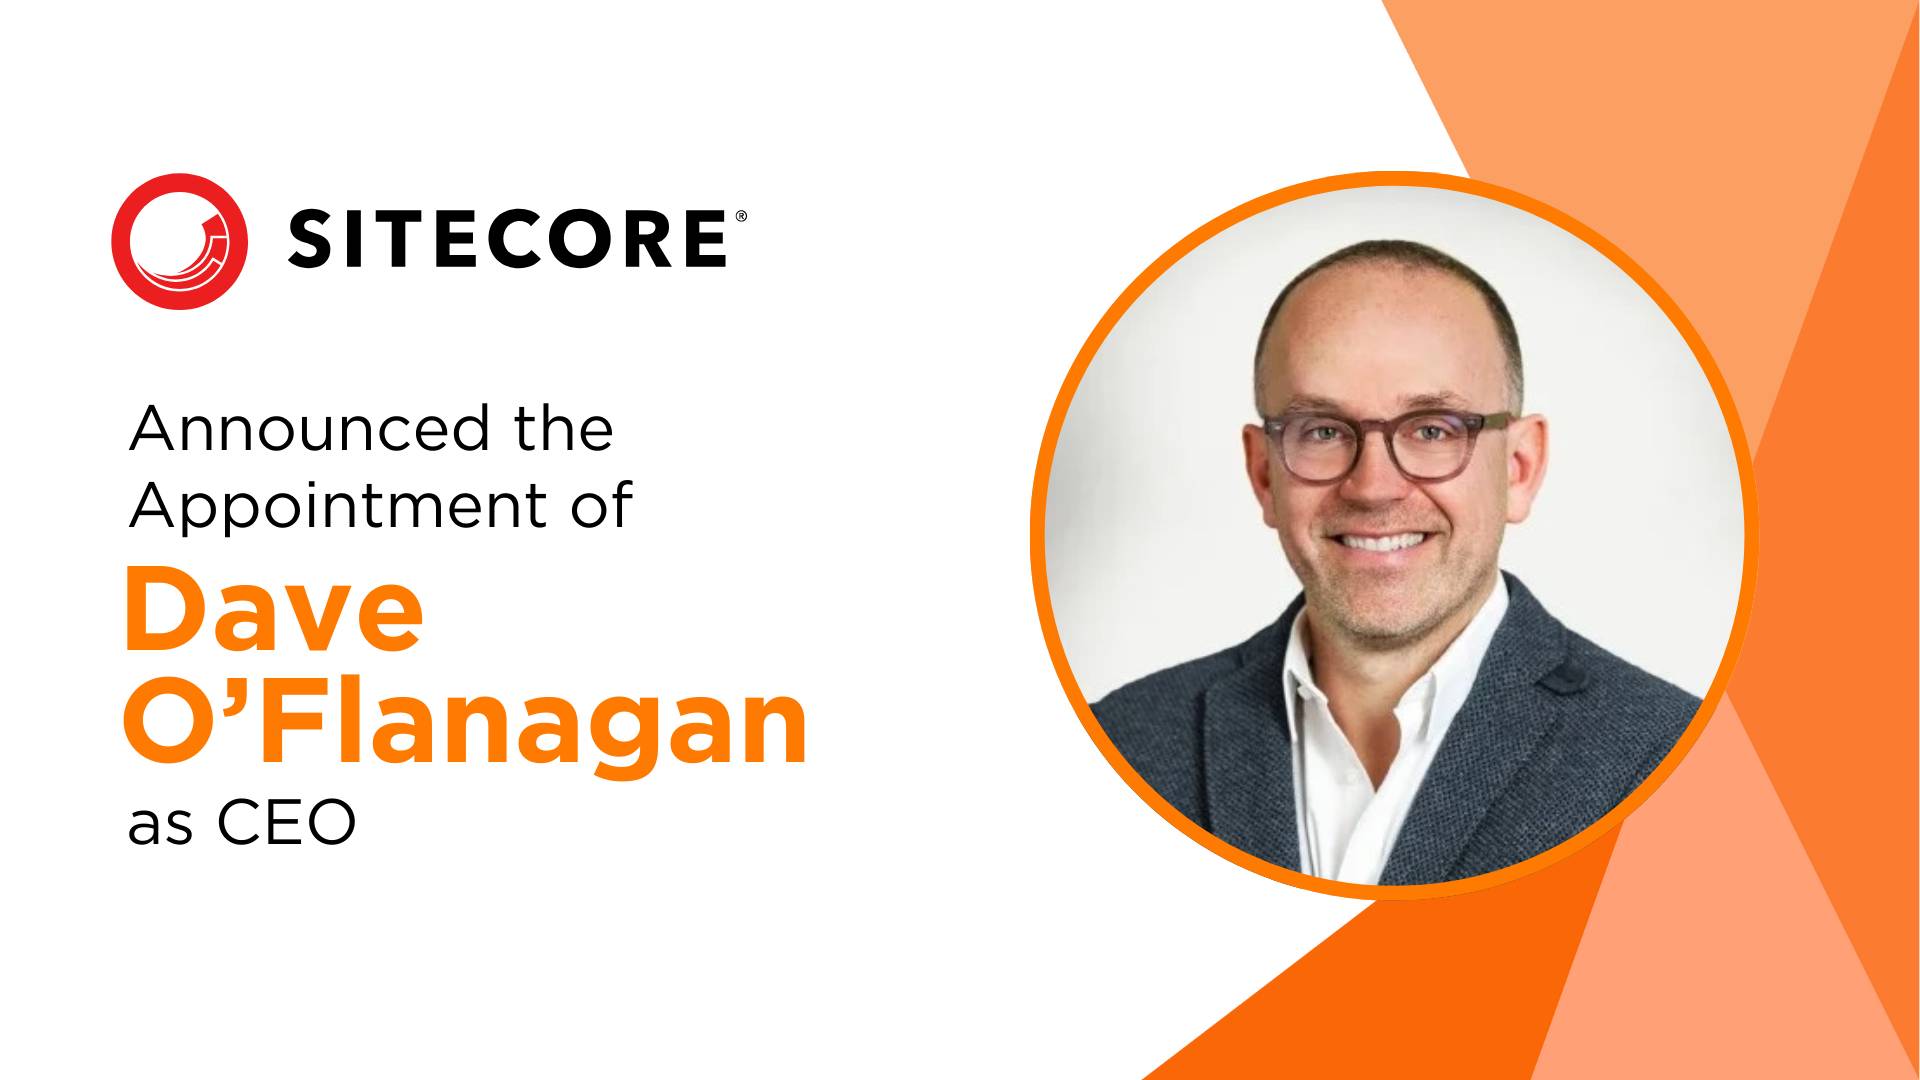 Sitecore Appoints Dave O’Flanagan as CEO to Drive DXP Leadership and AI Innovation